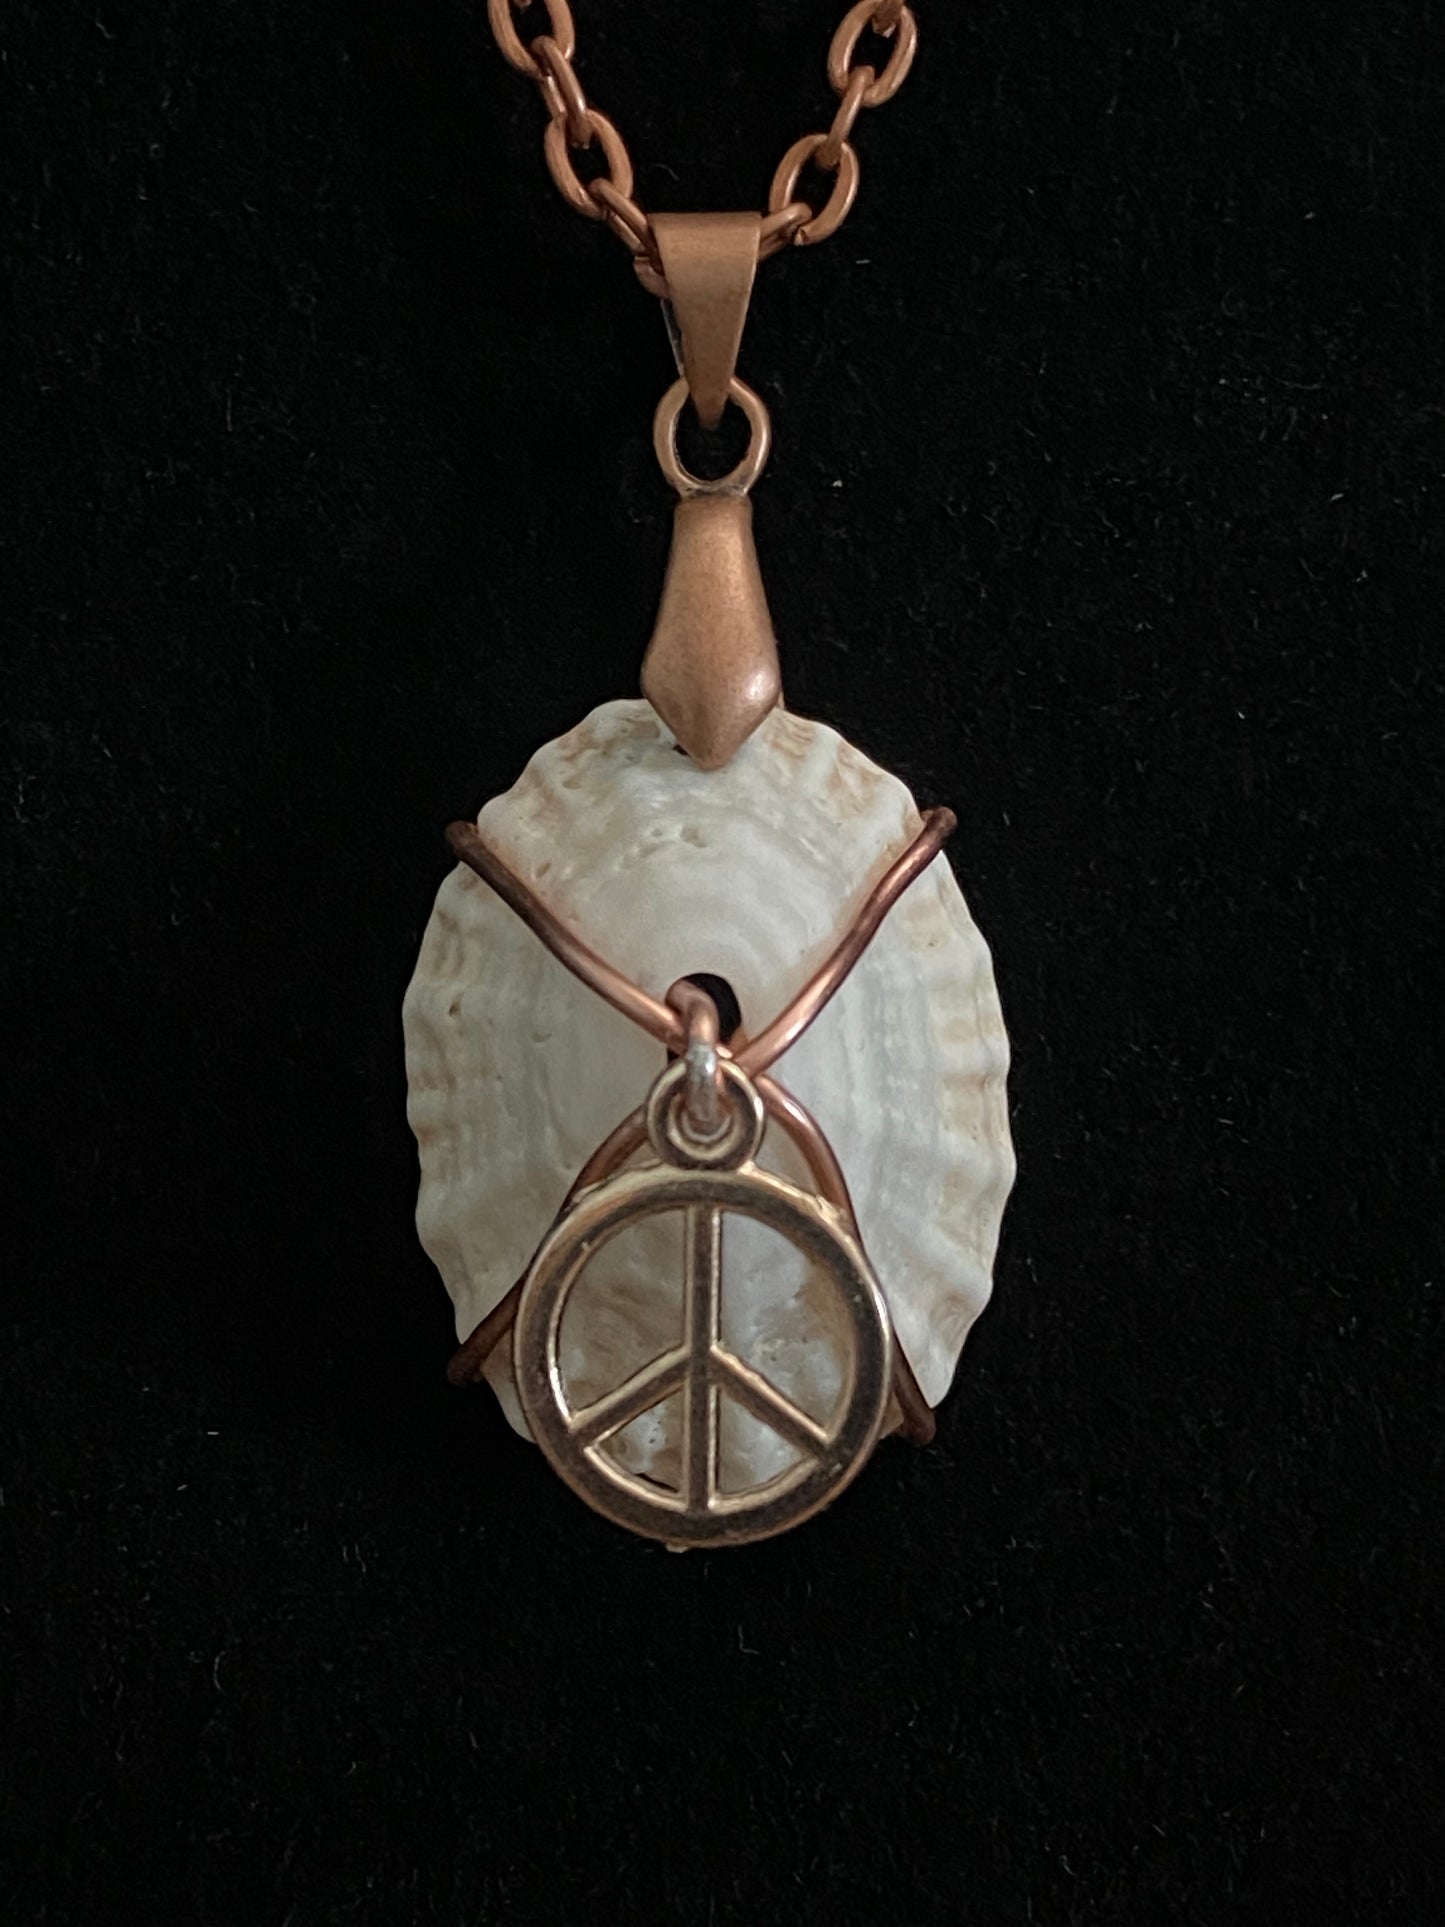 Tan, Brown and White Seashell with Red Copper Chain Necklace and Peace Sign Charm